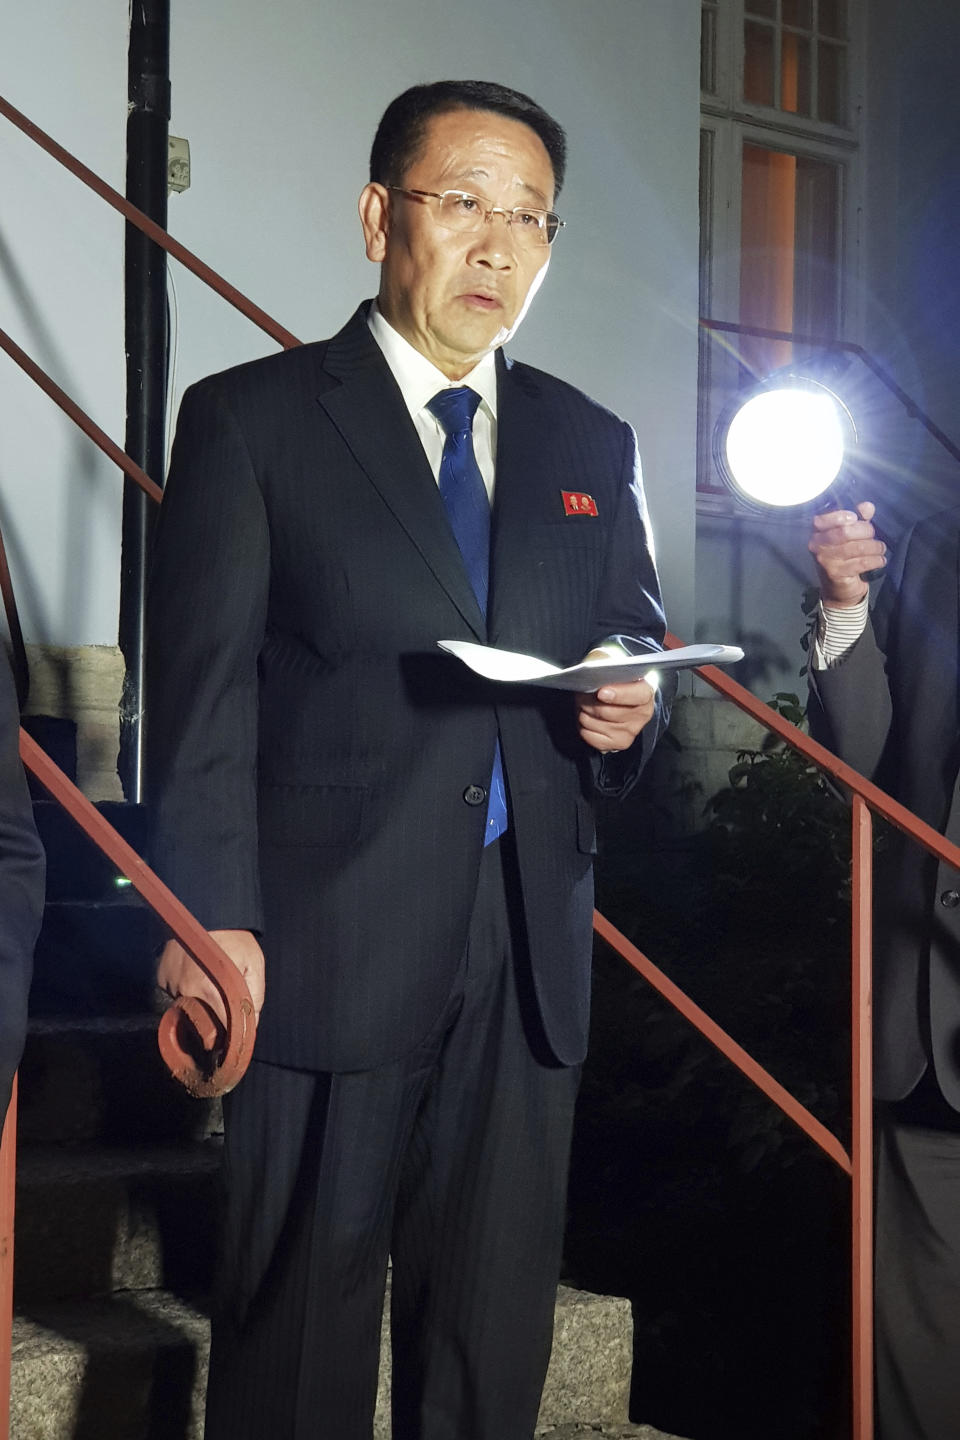 North Korean negotiator, Kim Miyong Gil speaks outside the North Korean Embassy in Stockholm, Sweden, Saturday, Oct. 5, 2019. North Korea's chief negotiator said Saturday that discussions with the U.S. on Pyongyang's nuclear program have broken down, but Washington said the two sides had "good discussions" that it intends to build on in two weeks. (KOREA POOL/Yonhap via AP)